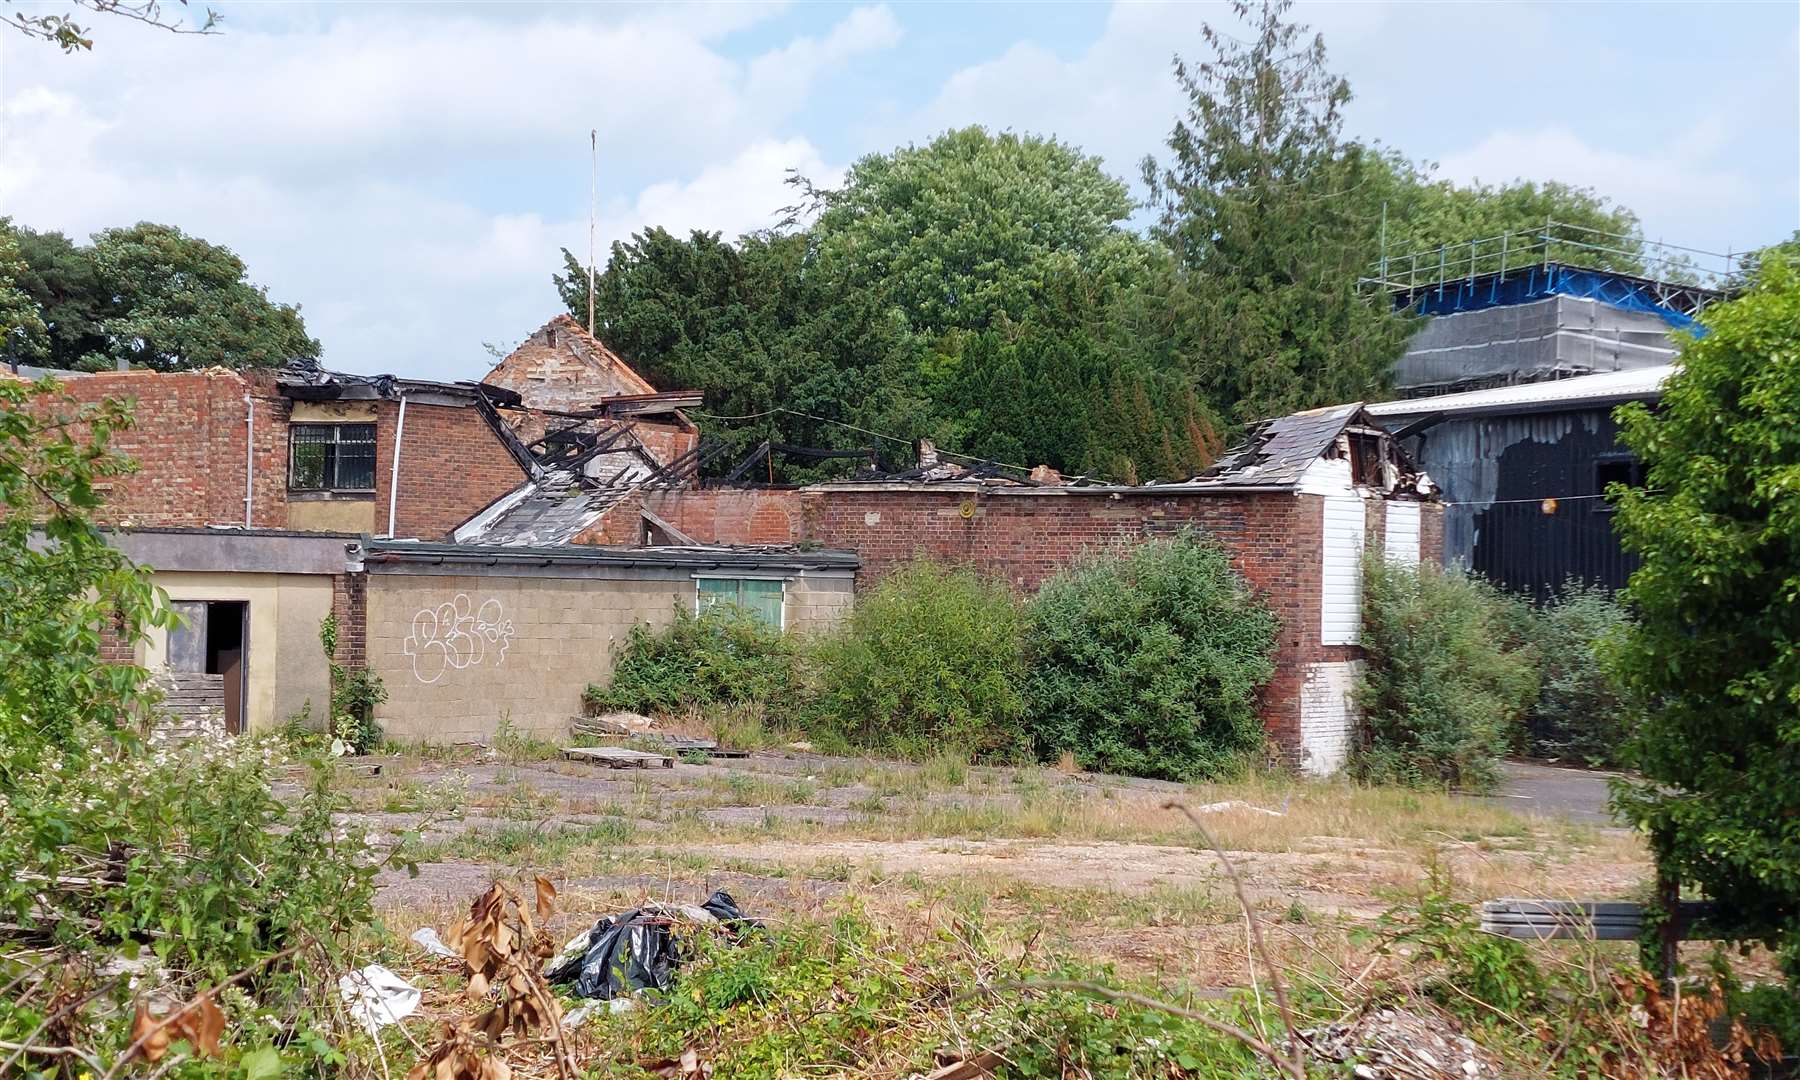 The abandoned buildings in Tannery Lane have been a magnet for anti-social behaviour